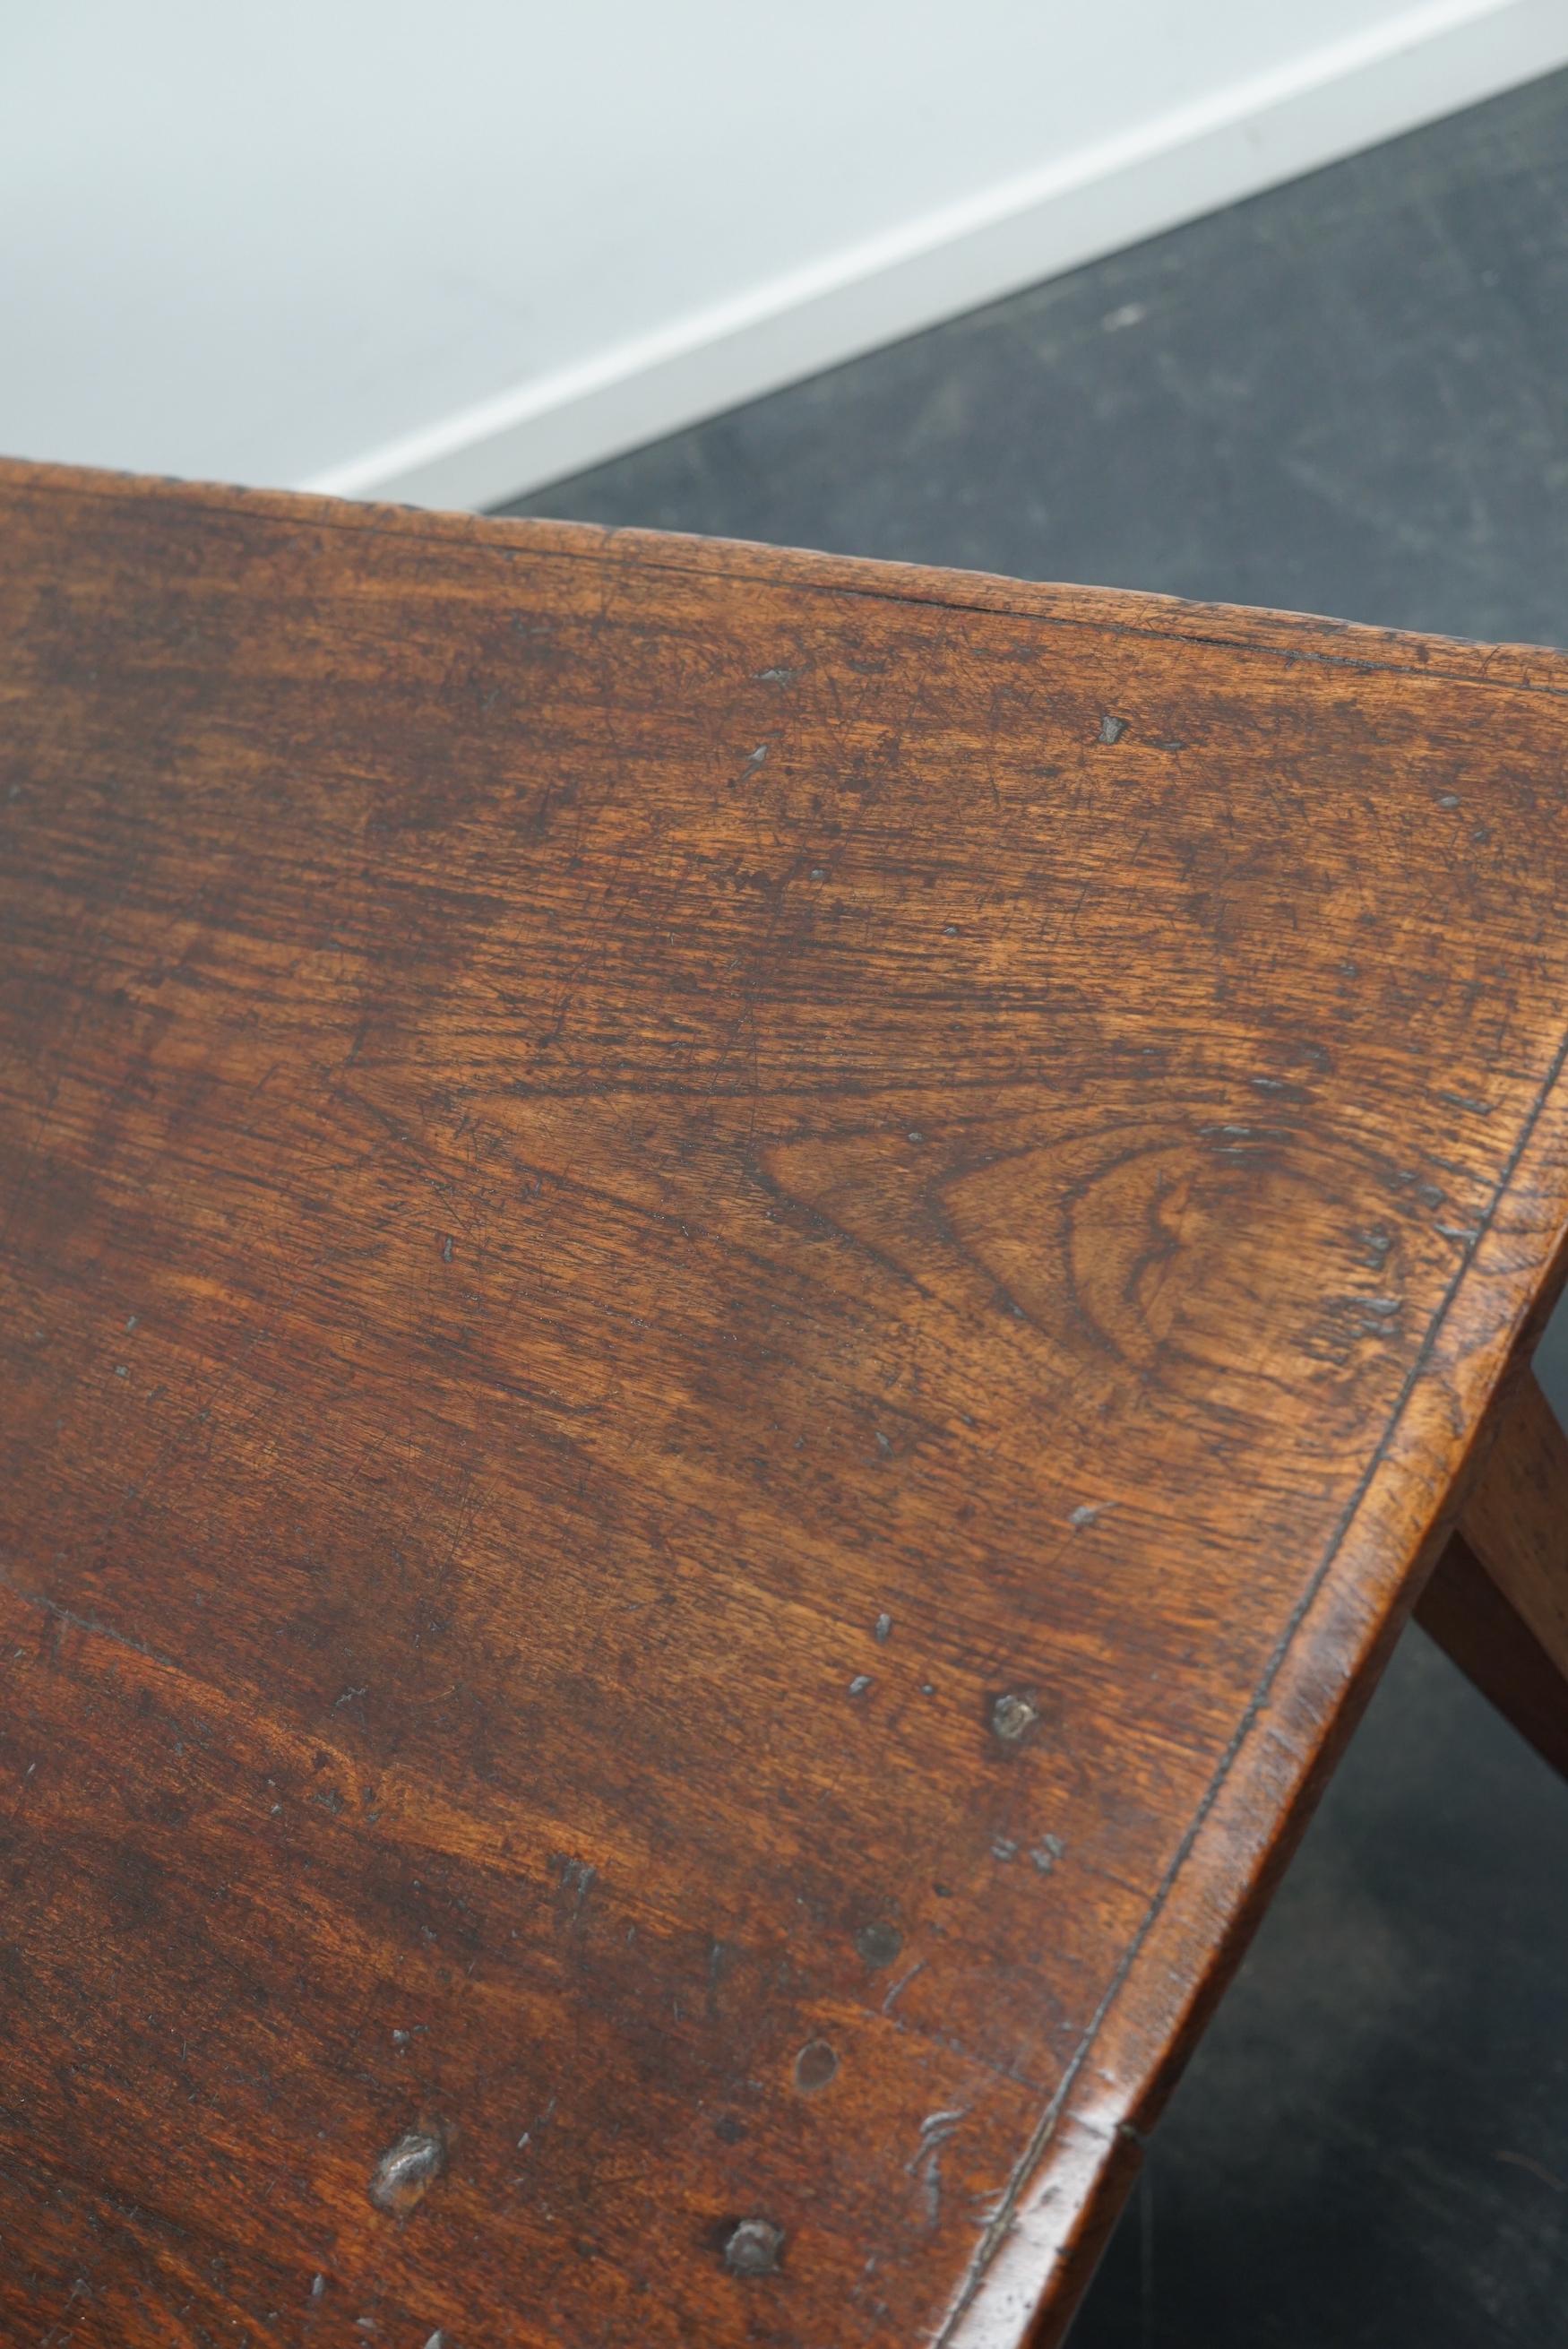 This elegant table was made in the Netherlands / Indonesia in the late 19th century. It has a tabletop made from large slabs of wood. The table was made in solid Indonesian teak with a beautiful grain pattern. It has a warm color with deep gloss and